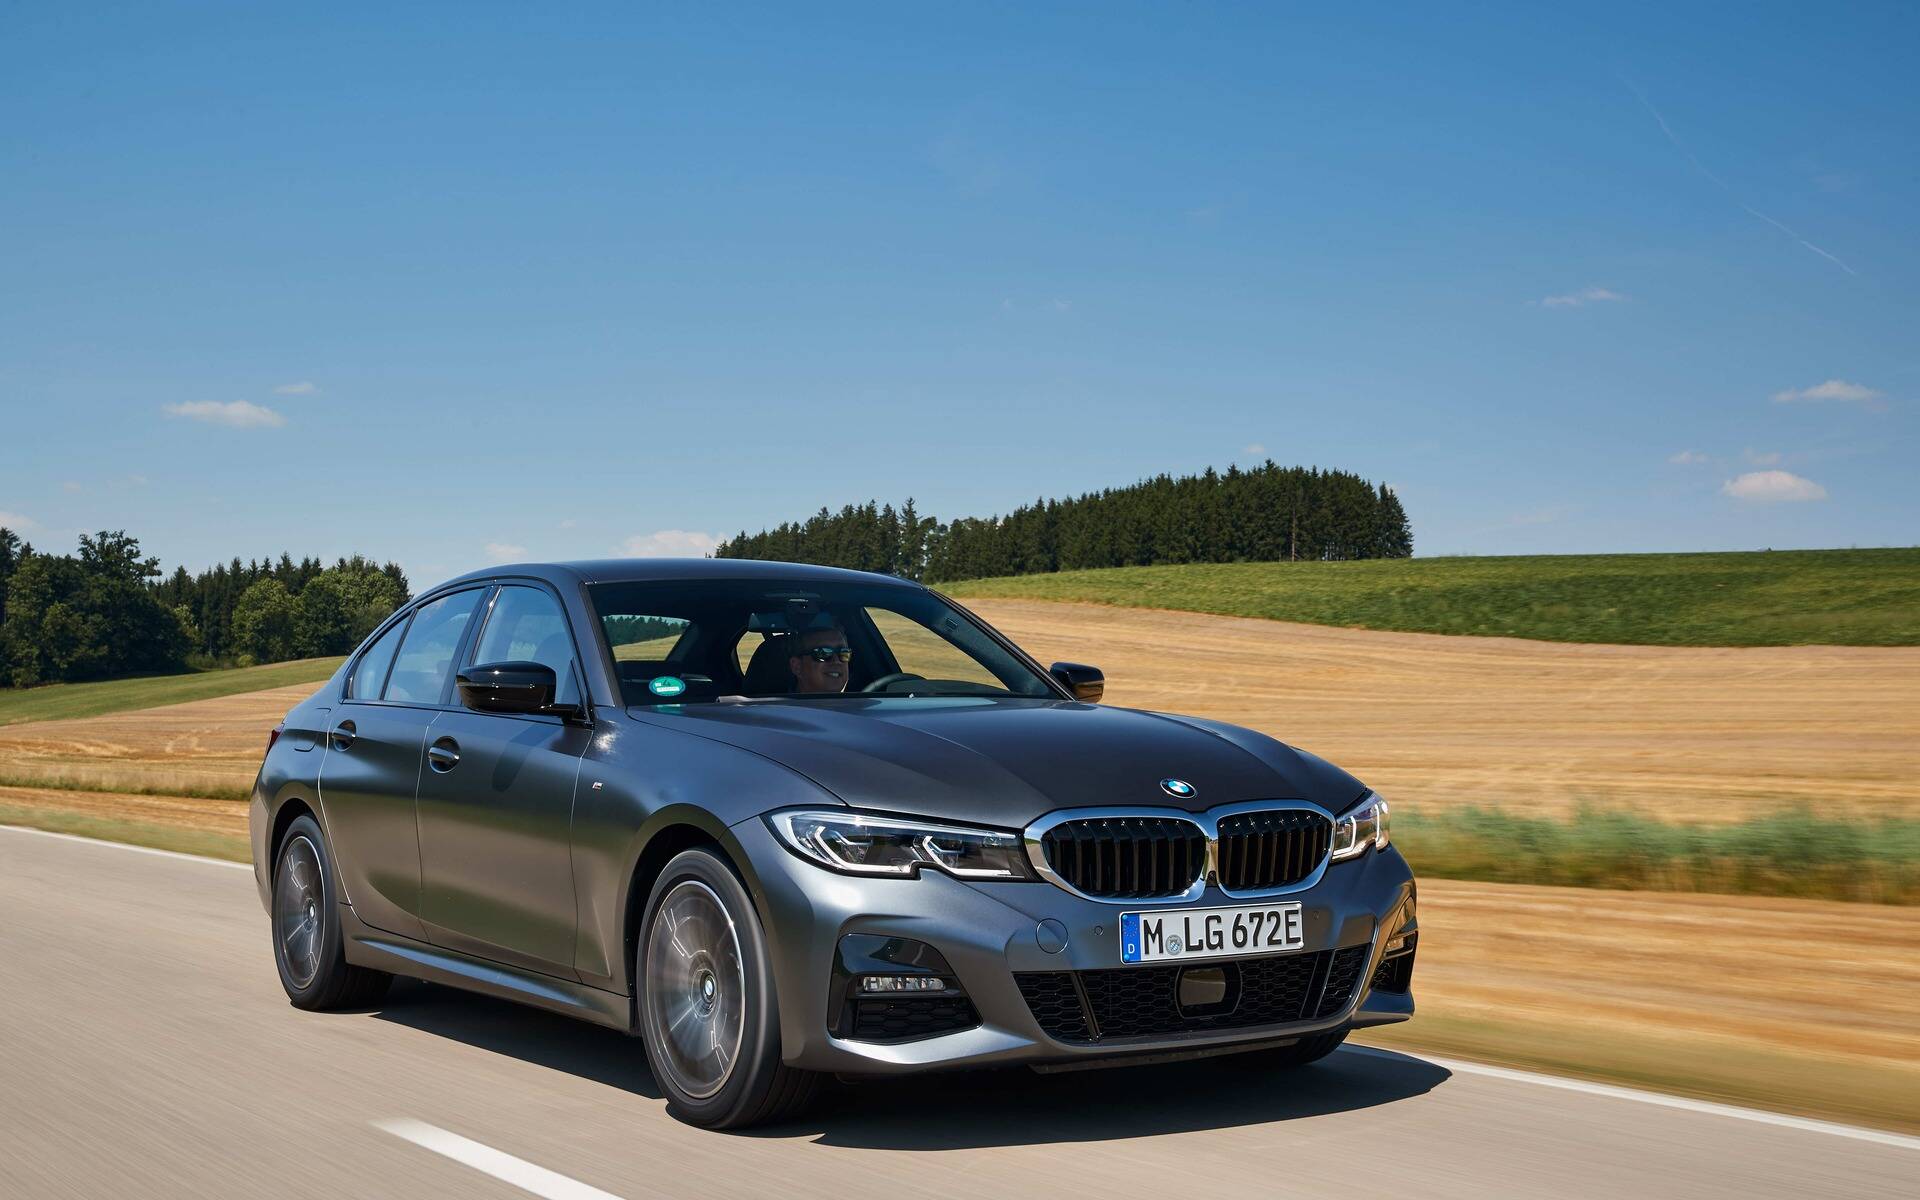 2021 BMW 3 Series Overview